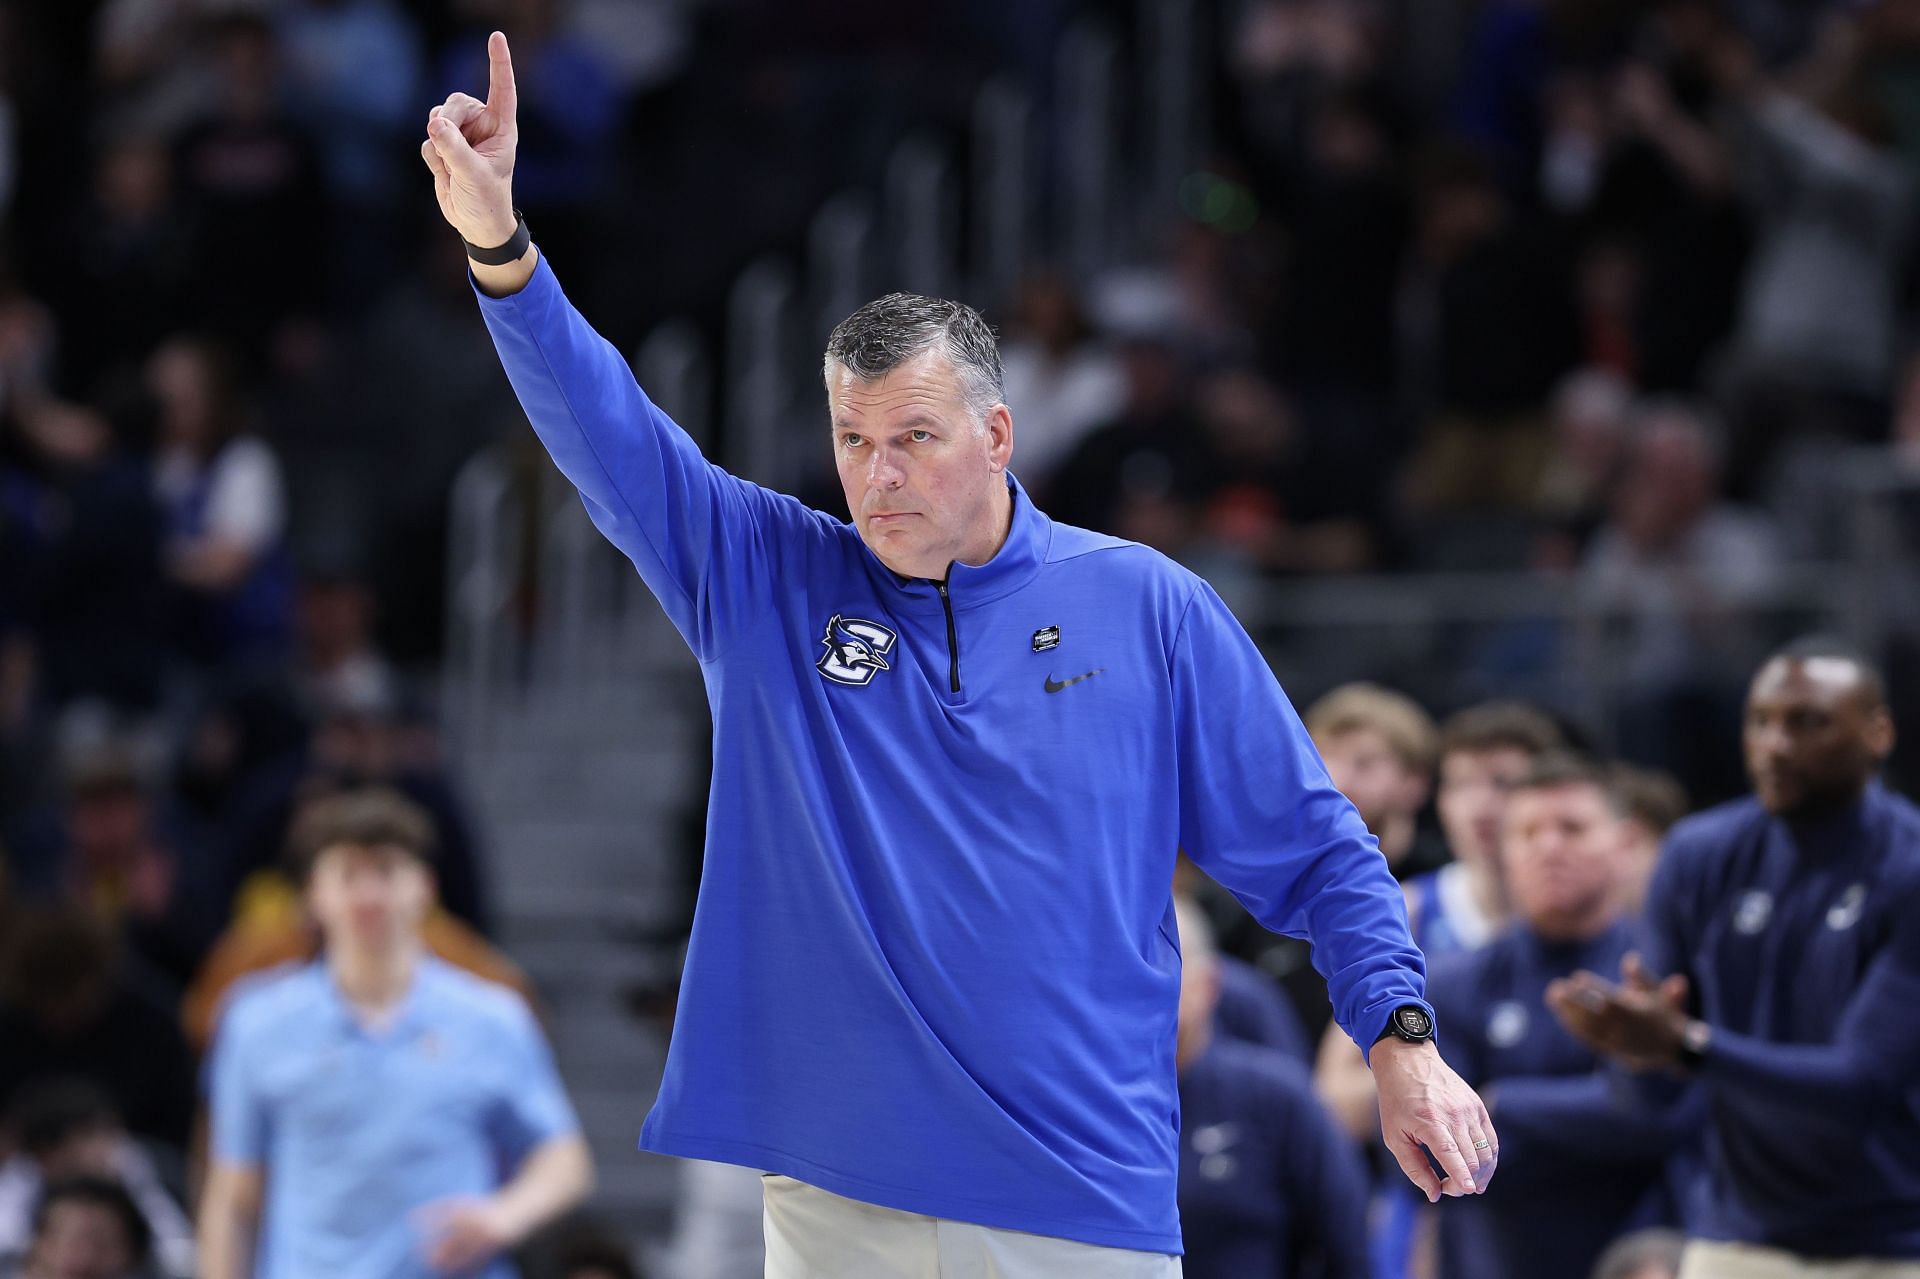 Creighton coach Greg McDermott recruited Richie Saunders out of high school and could recruit him again in the transfer portal with the Blue Jays.